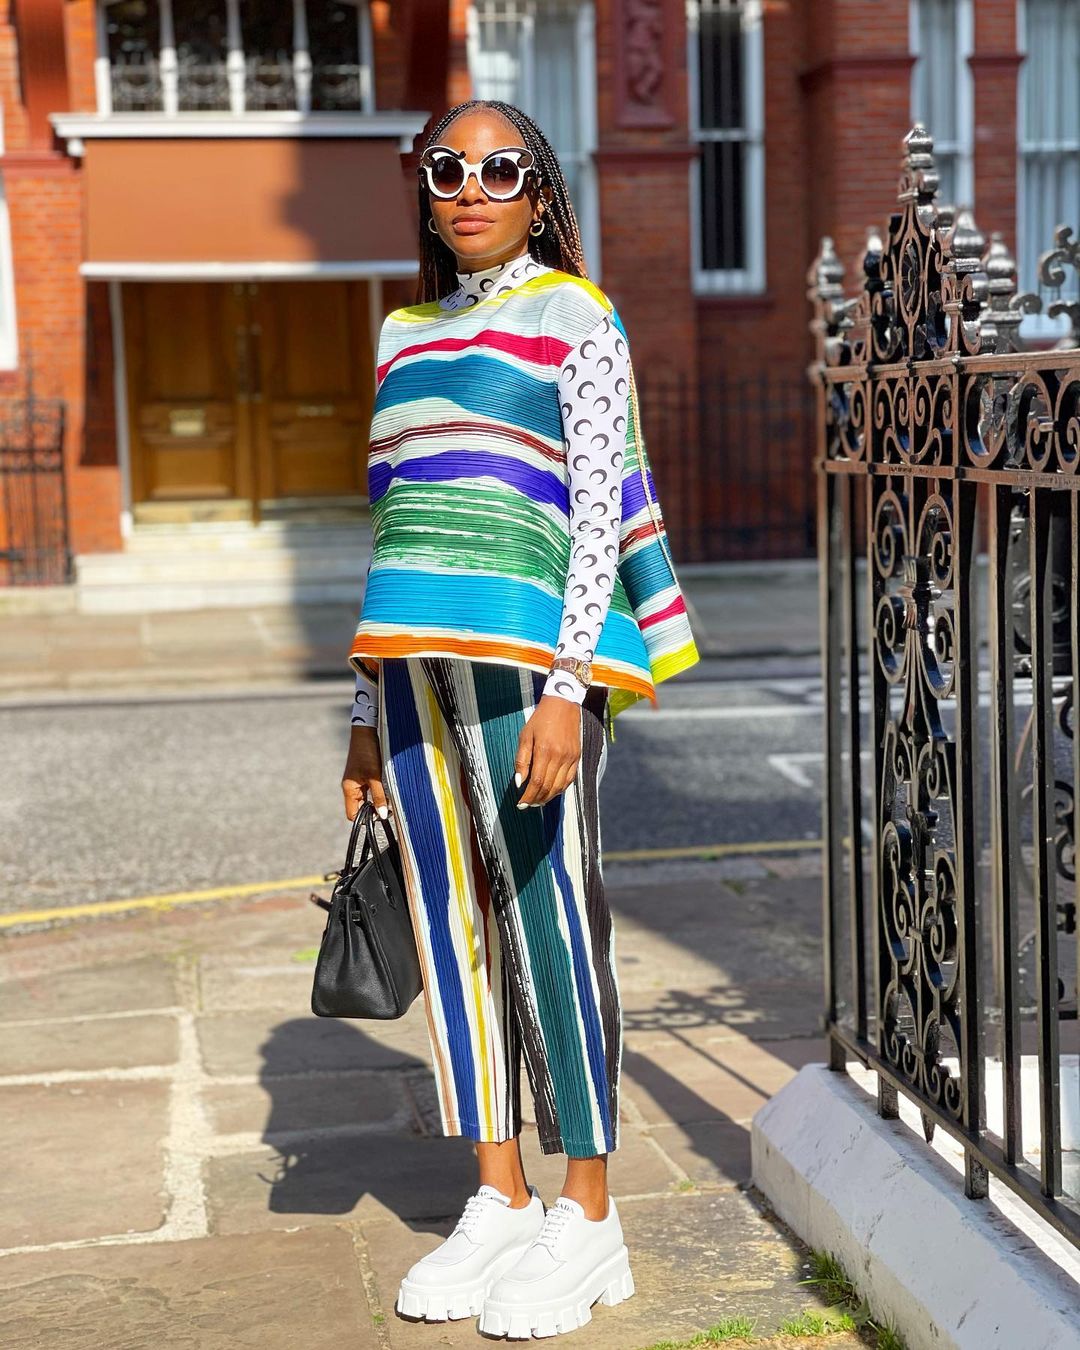 Look Of The Day: Lisa Folawiyo Shows Off Her Style In Contrasting Prints